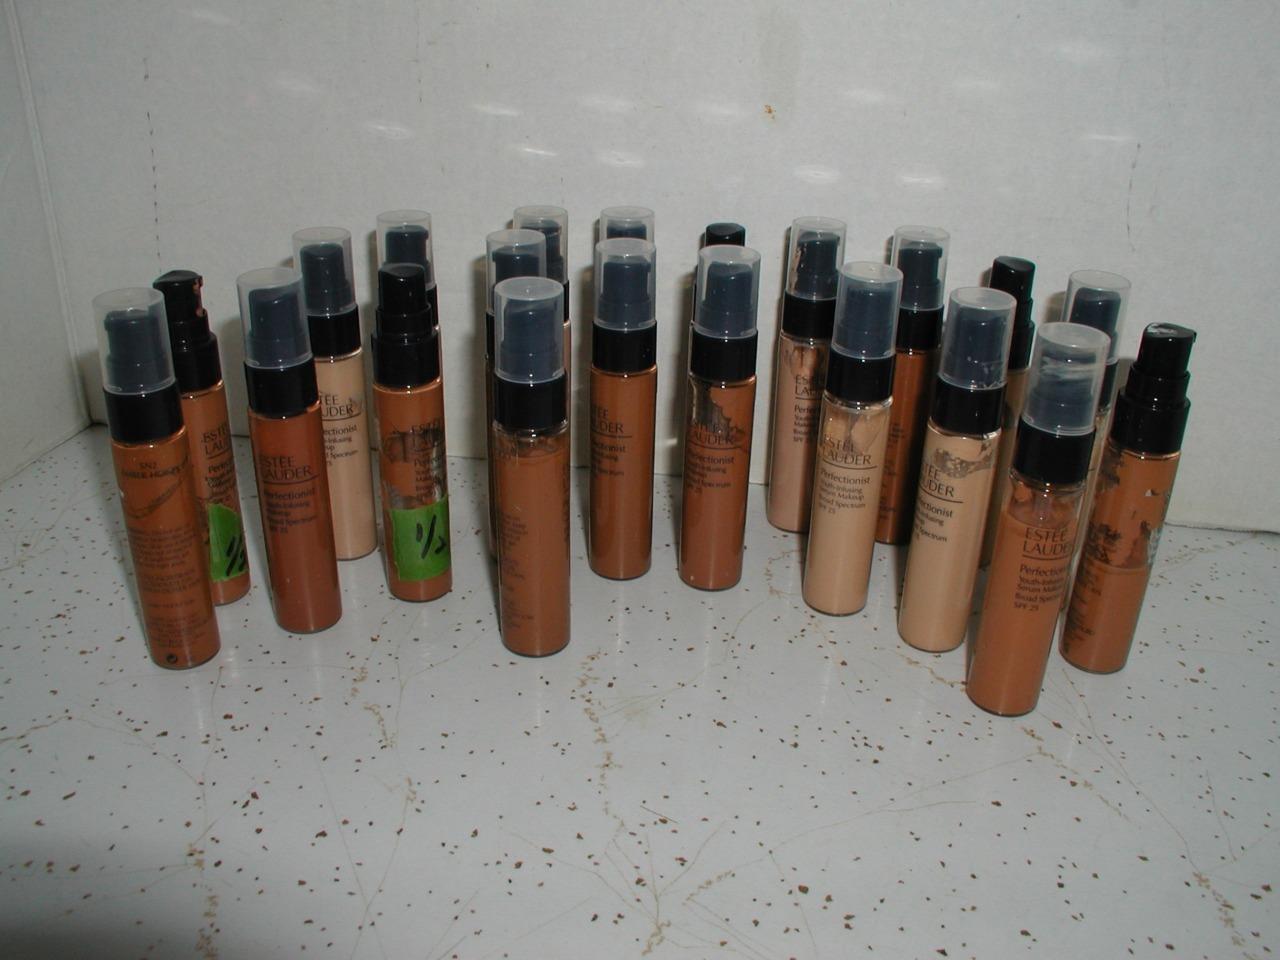 LOT of 21 Estee Lauder perfectionist youth infusing Makeup .5 oz Travel Size  C